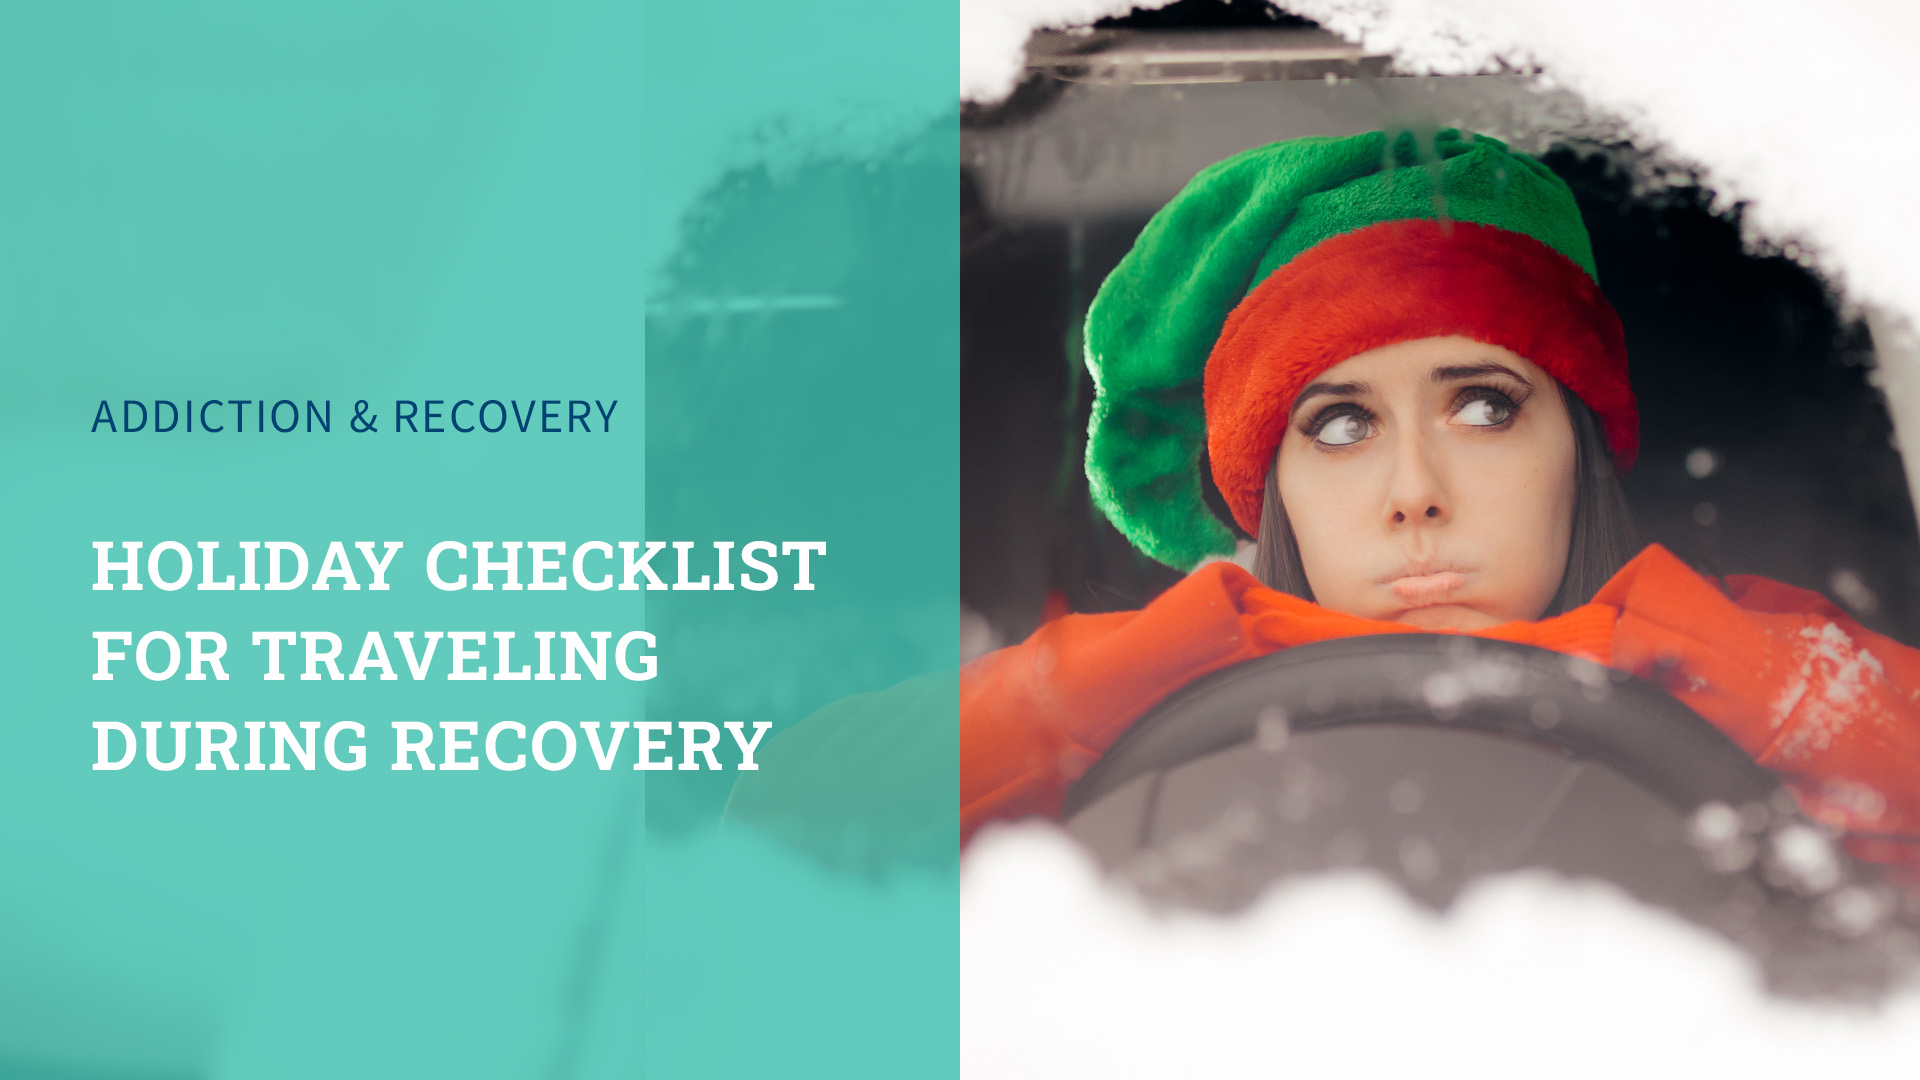 Holiday Checklist for Traveling During Recovery